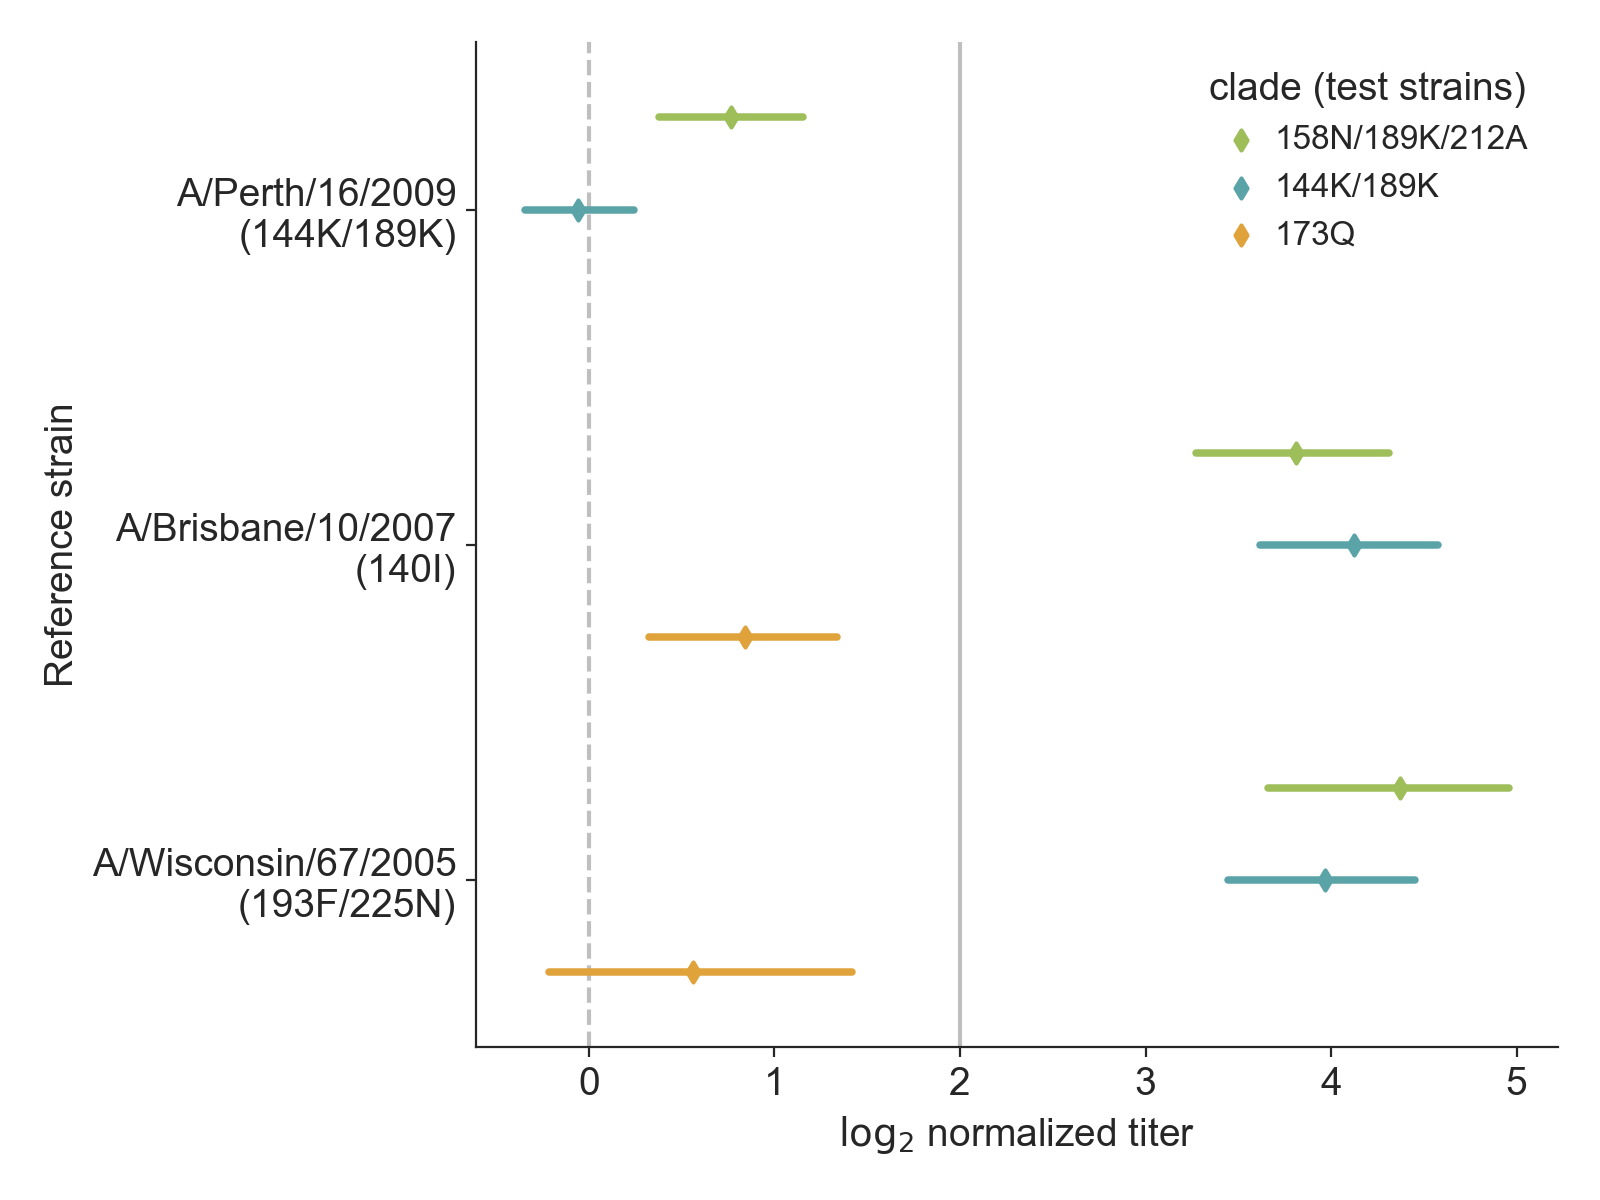 distributions of mean +/- 89% confidence intervals by reference serum and test clades